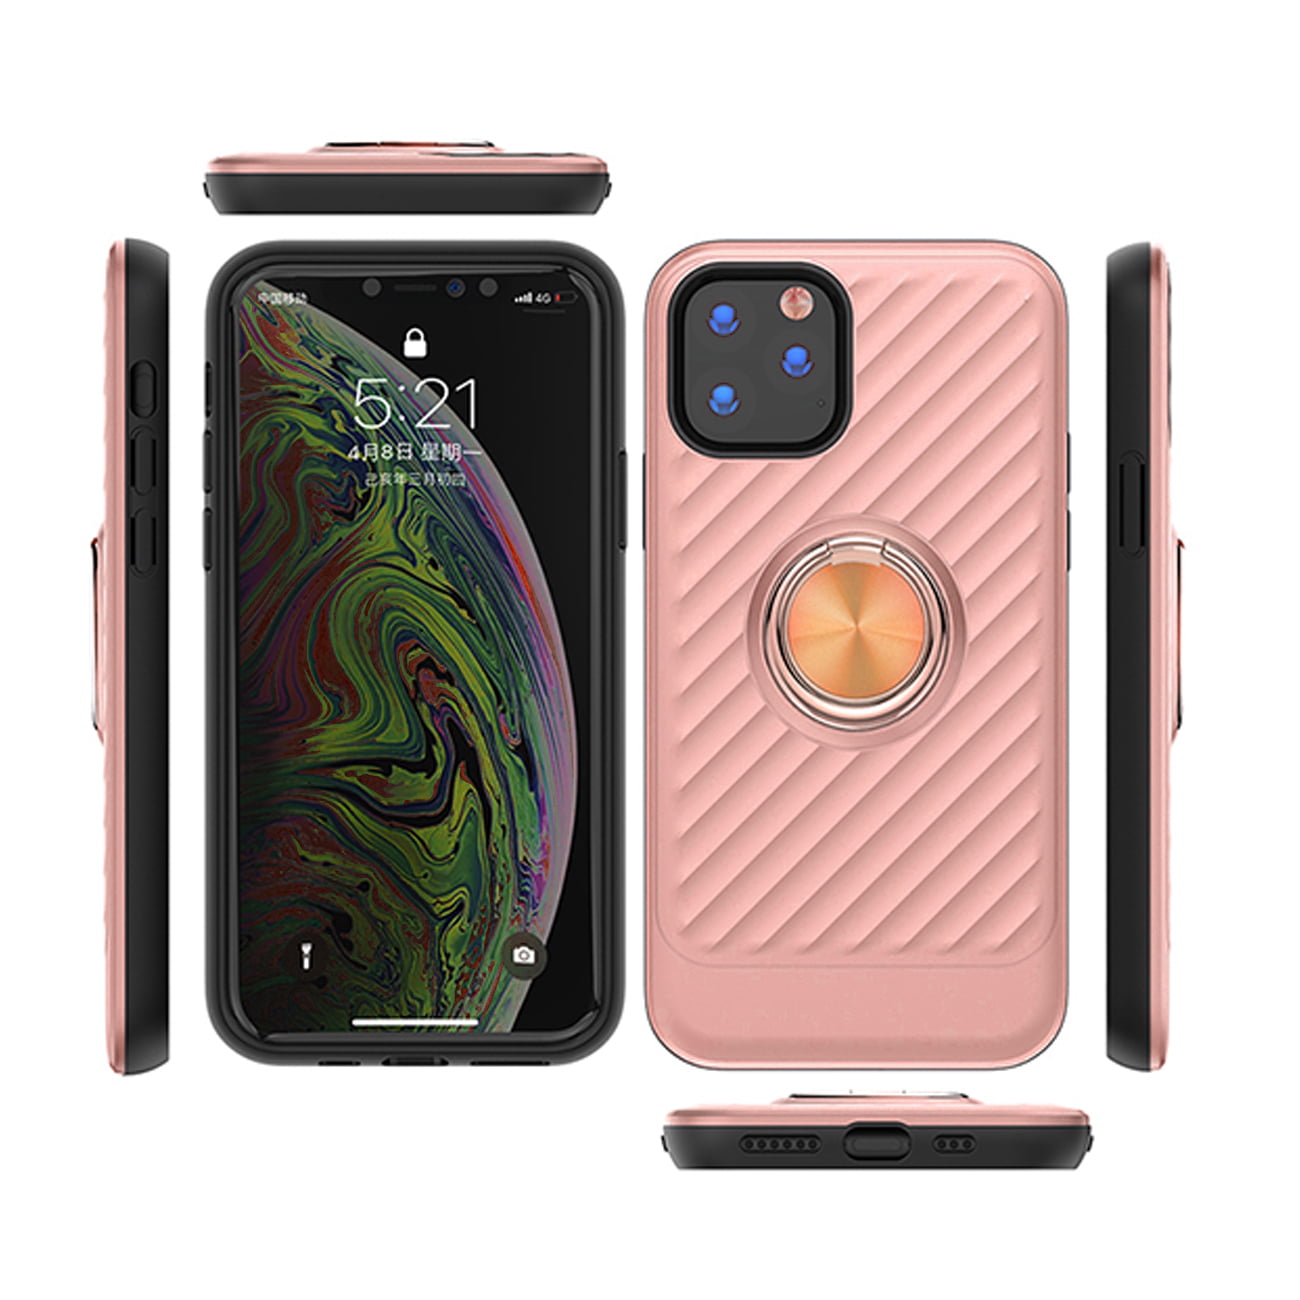 Apple Iphone 11 Pro Case With Ring Holder In Rose Gold Walmart Com Walmart Com